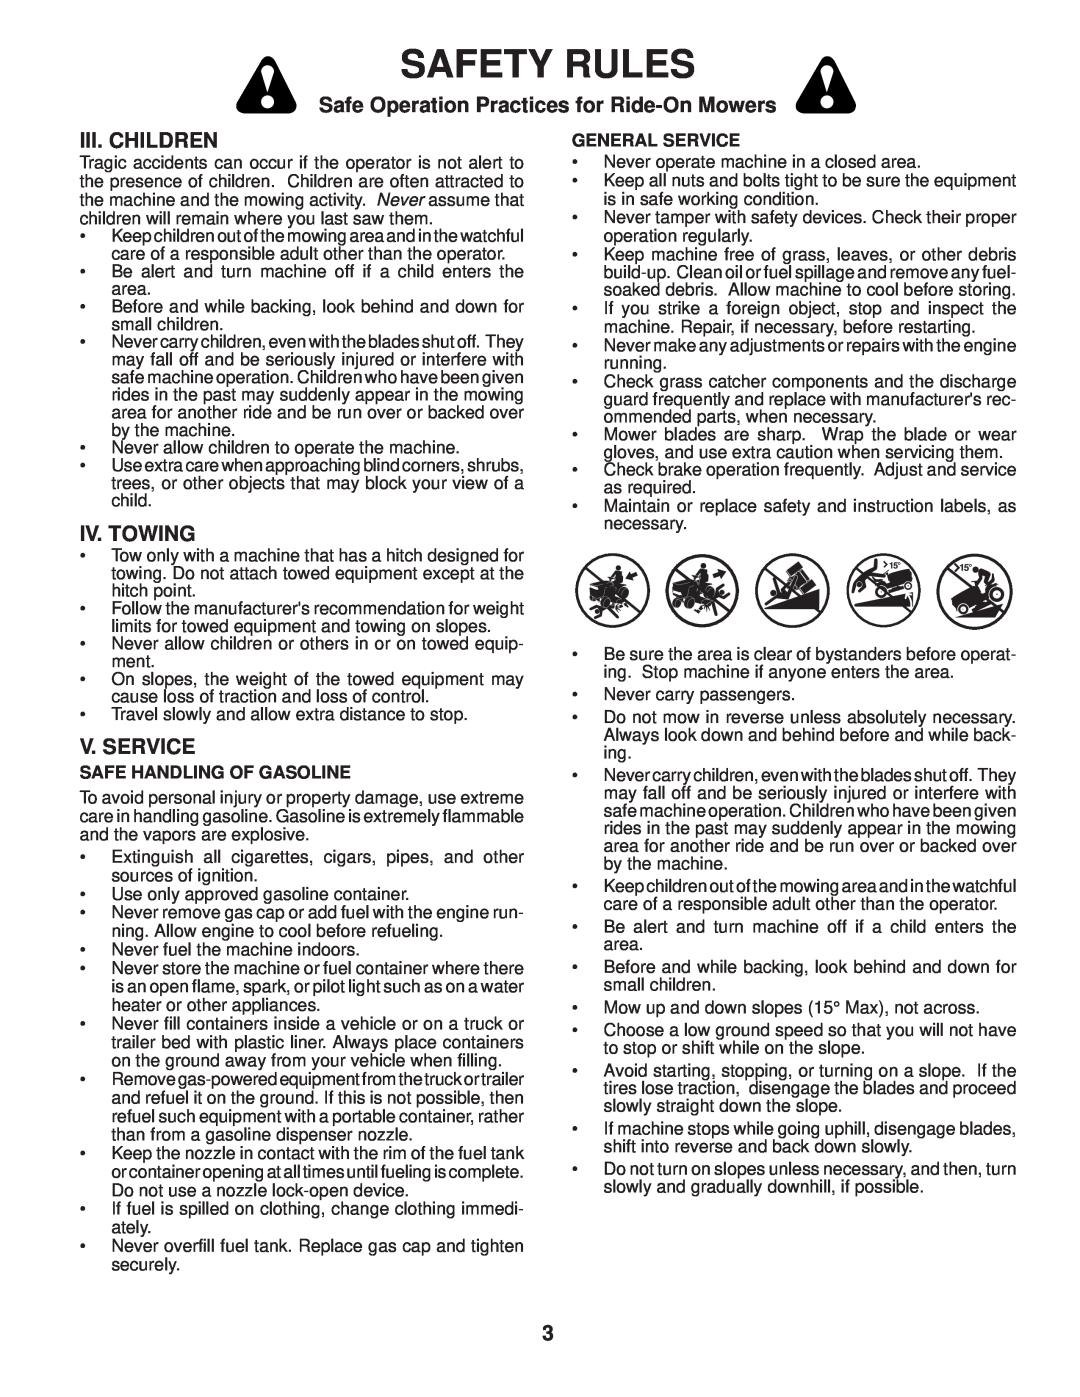 Poulan PB24H54YT manual Iii. Children, Iv. Towing, V. Service, Safety Rules, Safe Operation Practices for Ride-On Mowers 